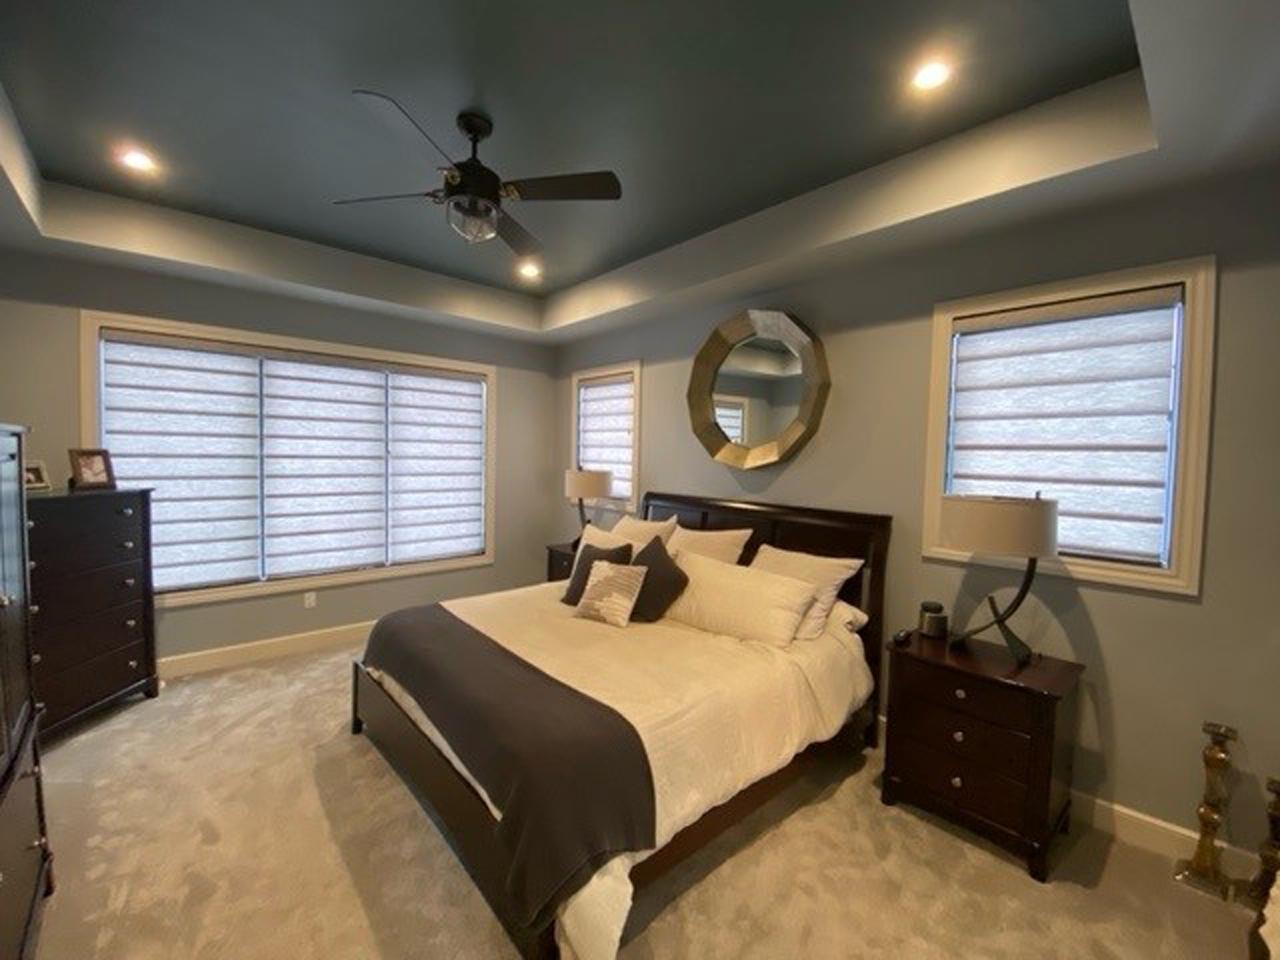 Modern Roman shades in a bedroom